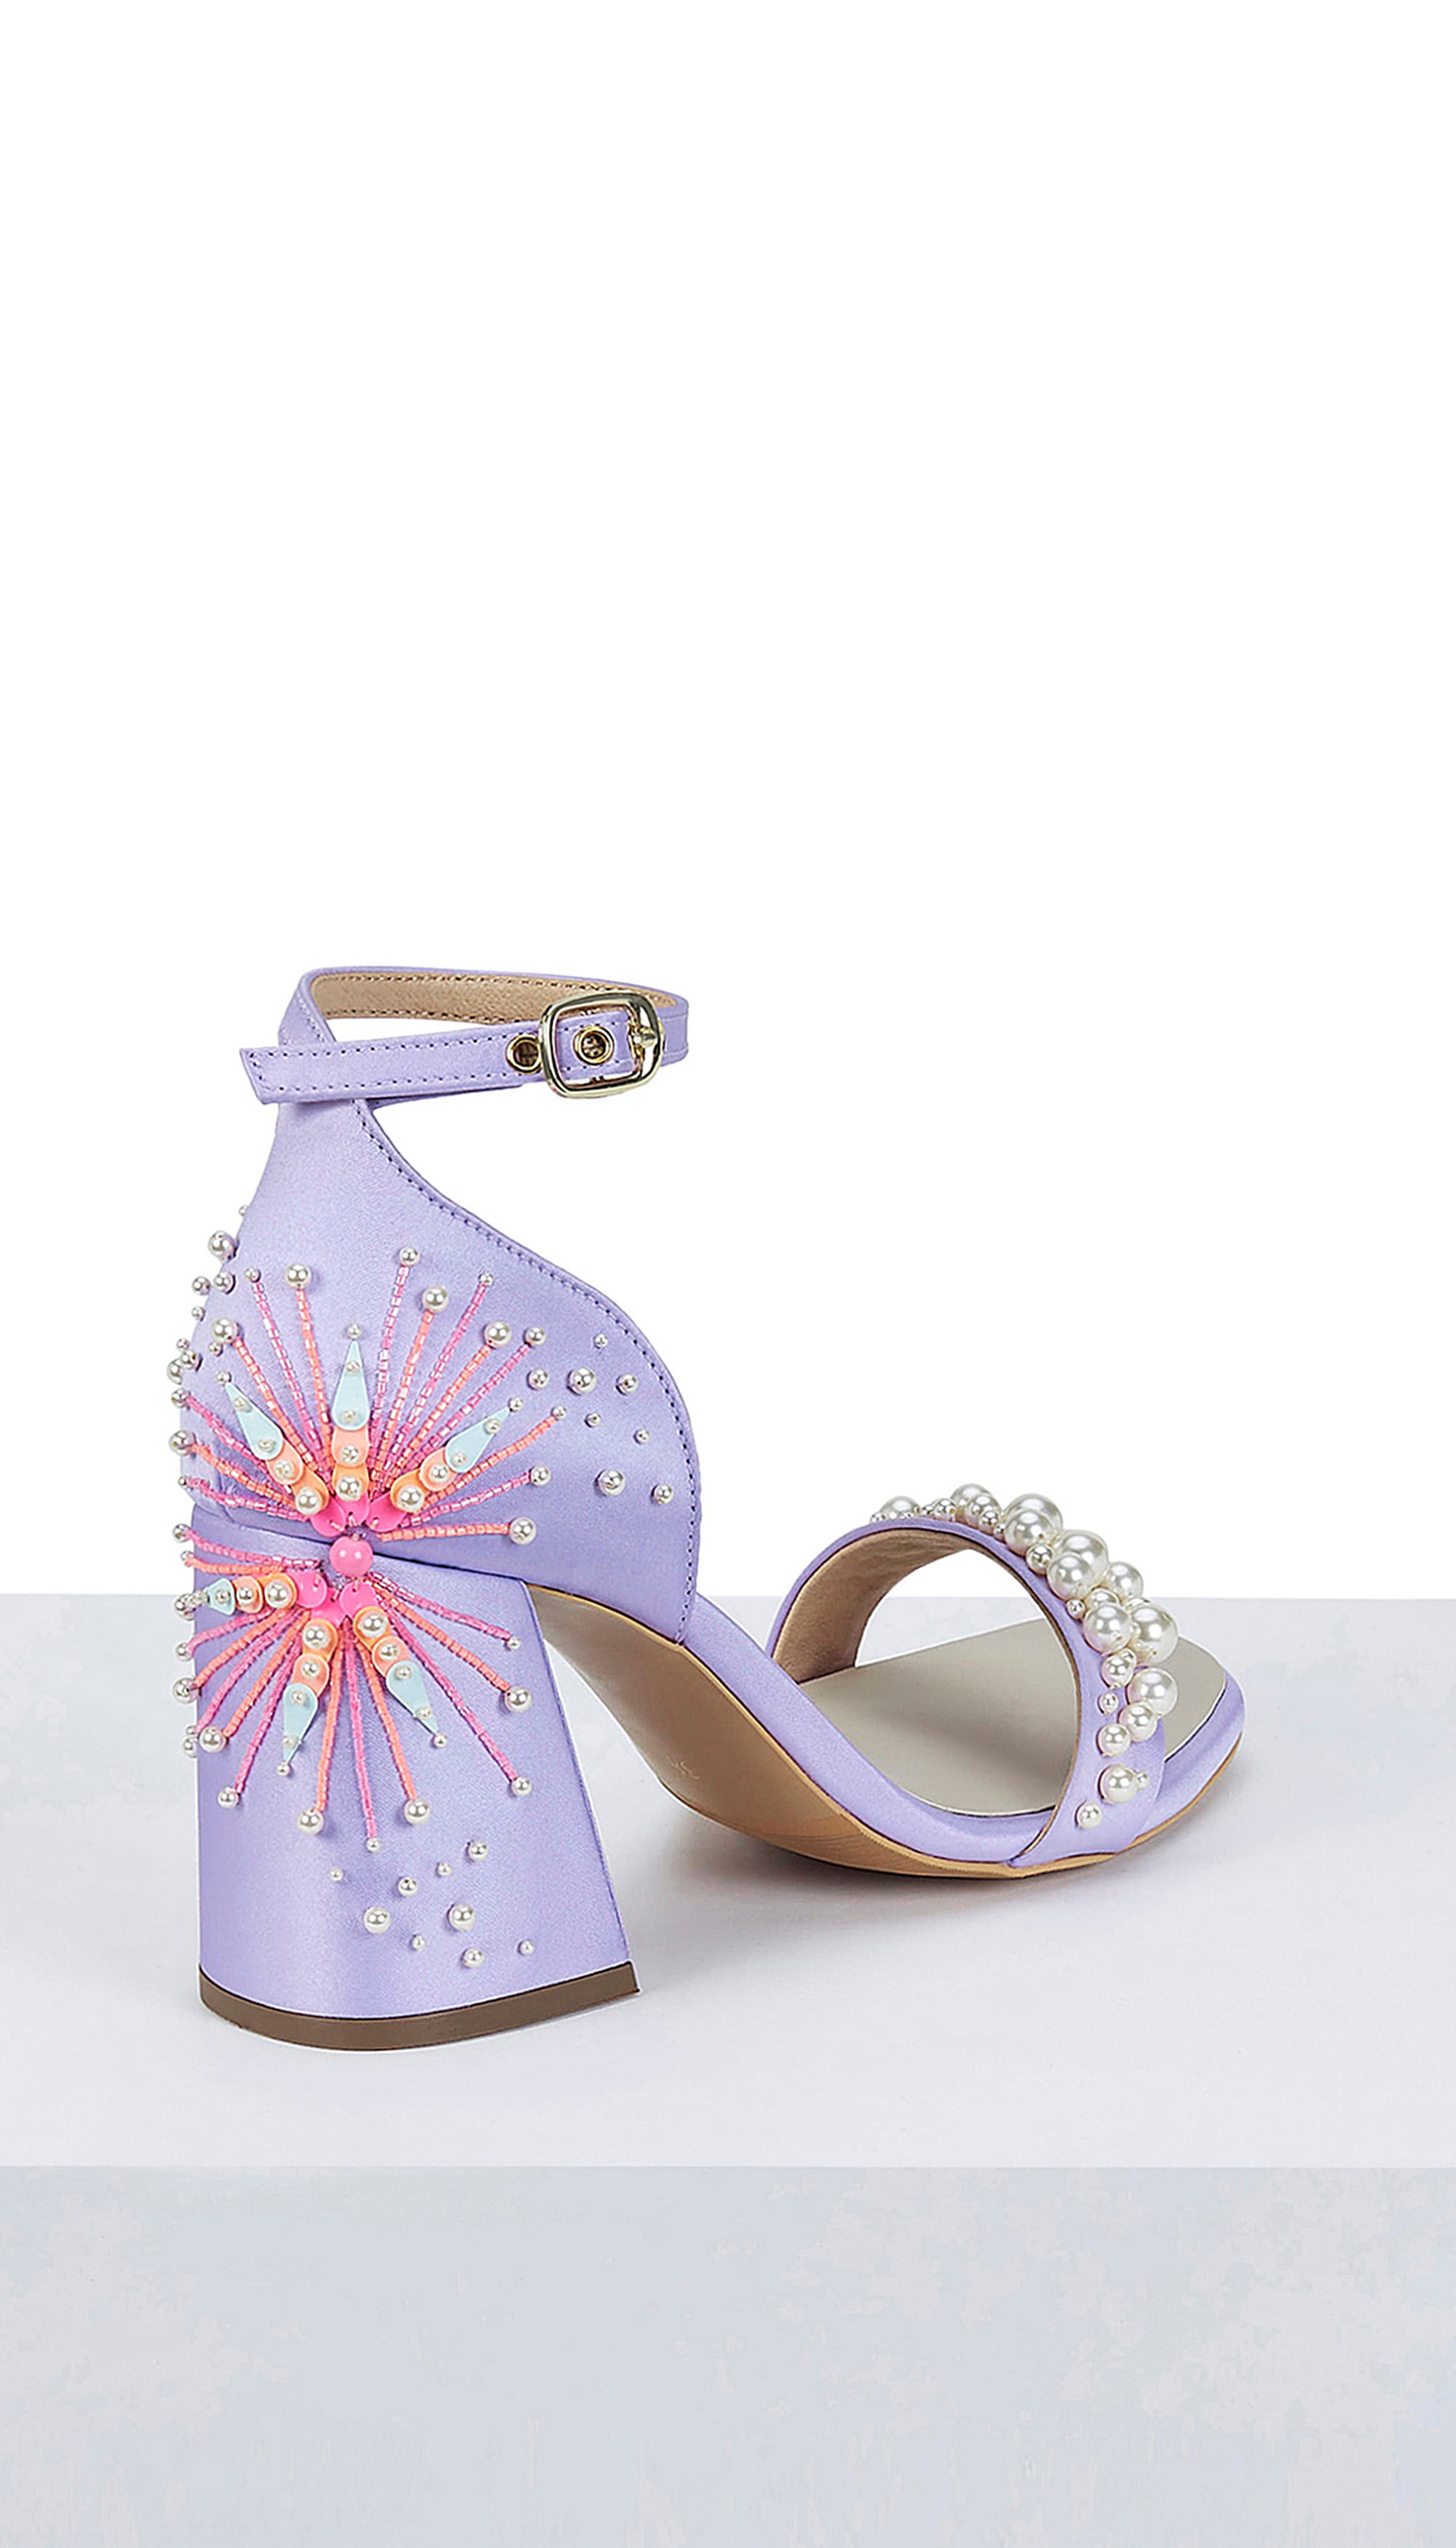 Buy Lavender Butterfly Heels, Garden Party Shoes Online in India - Etsy